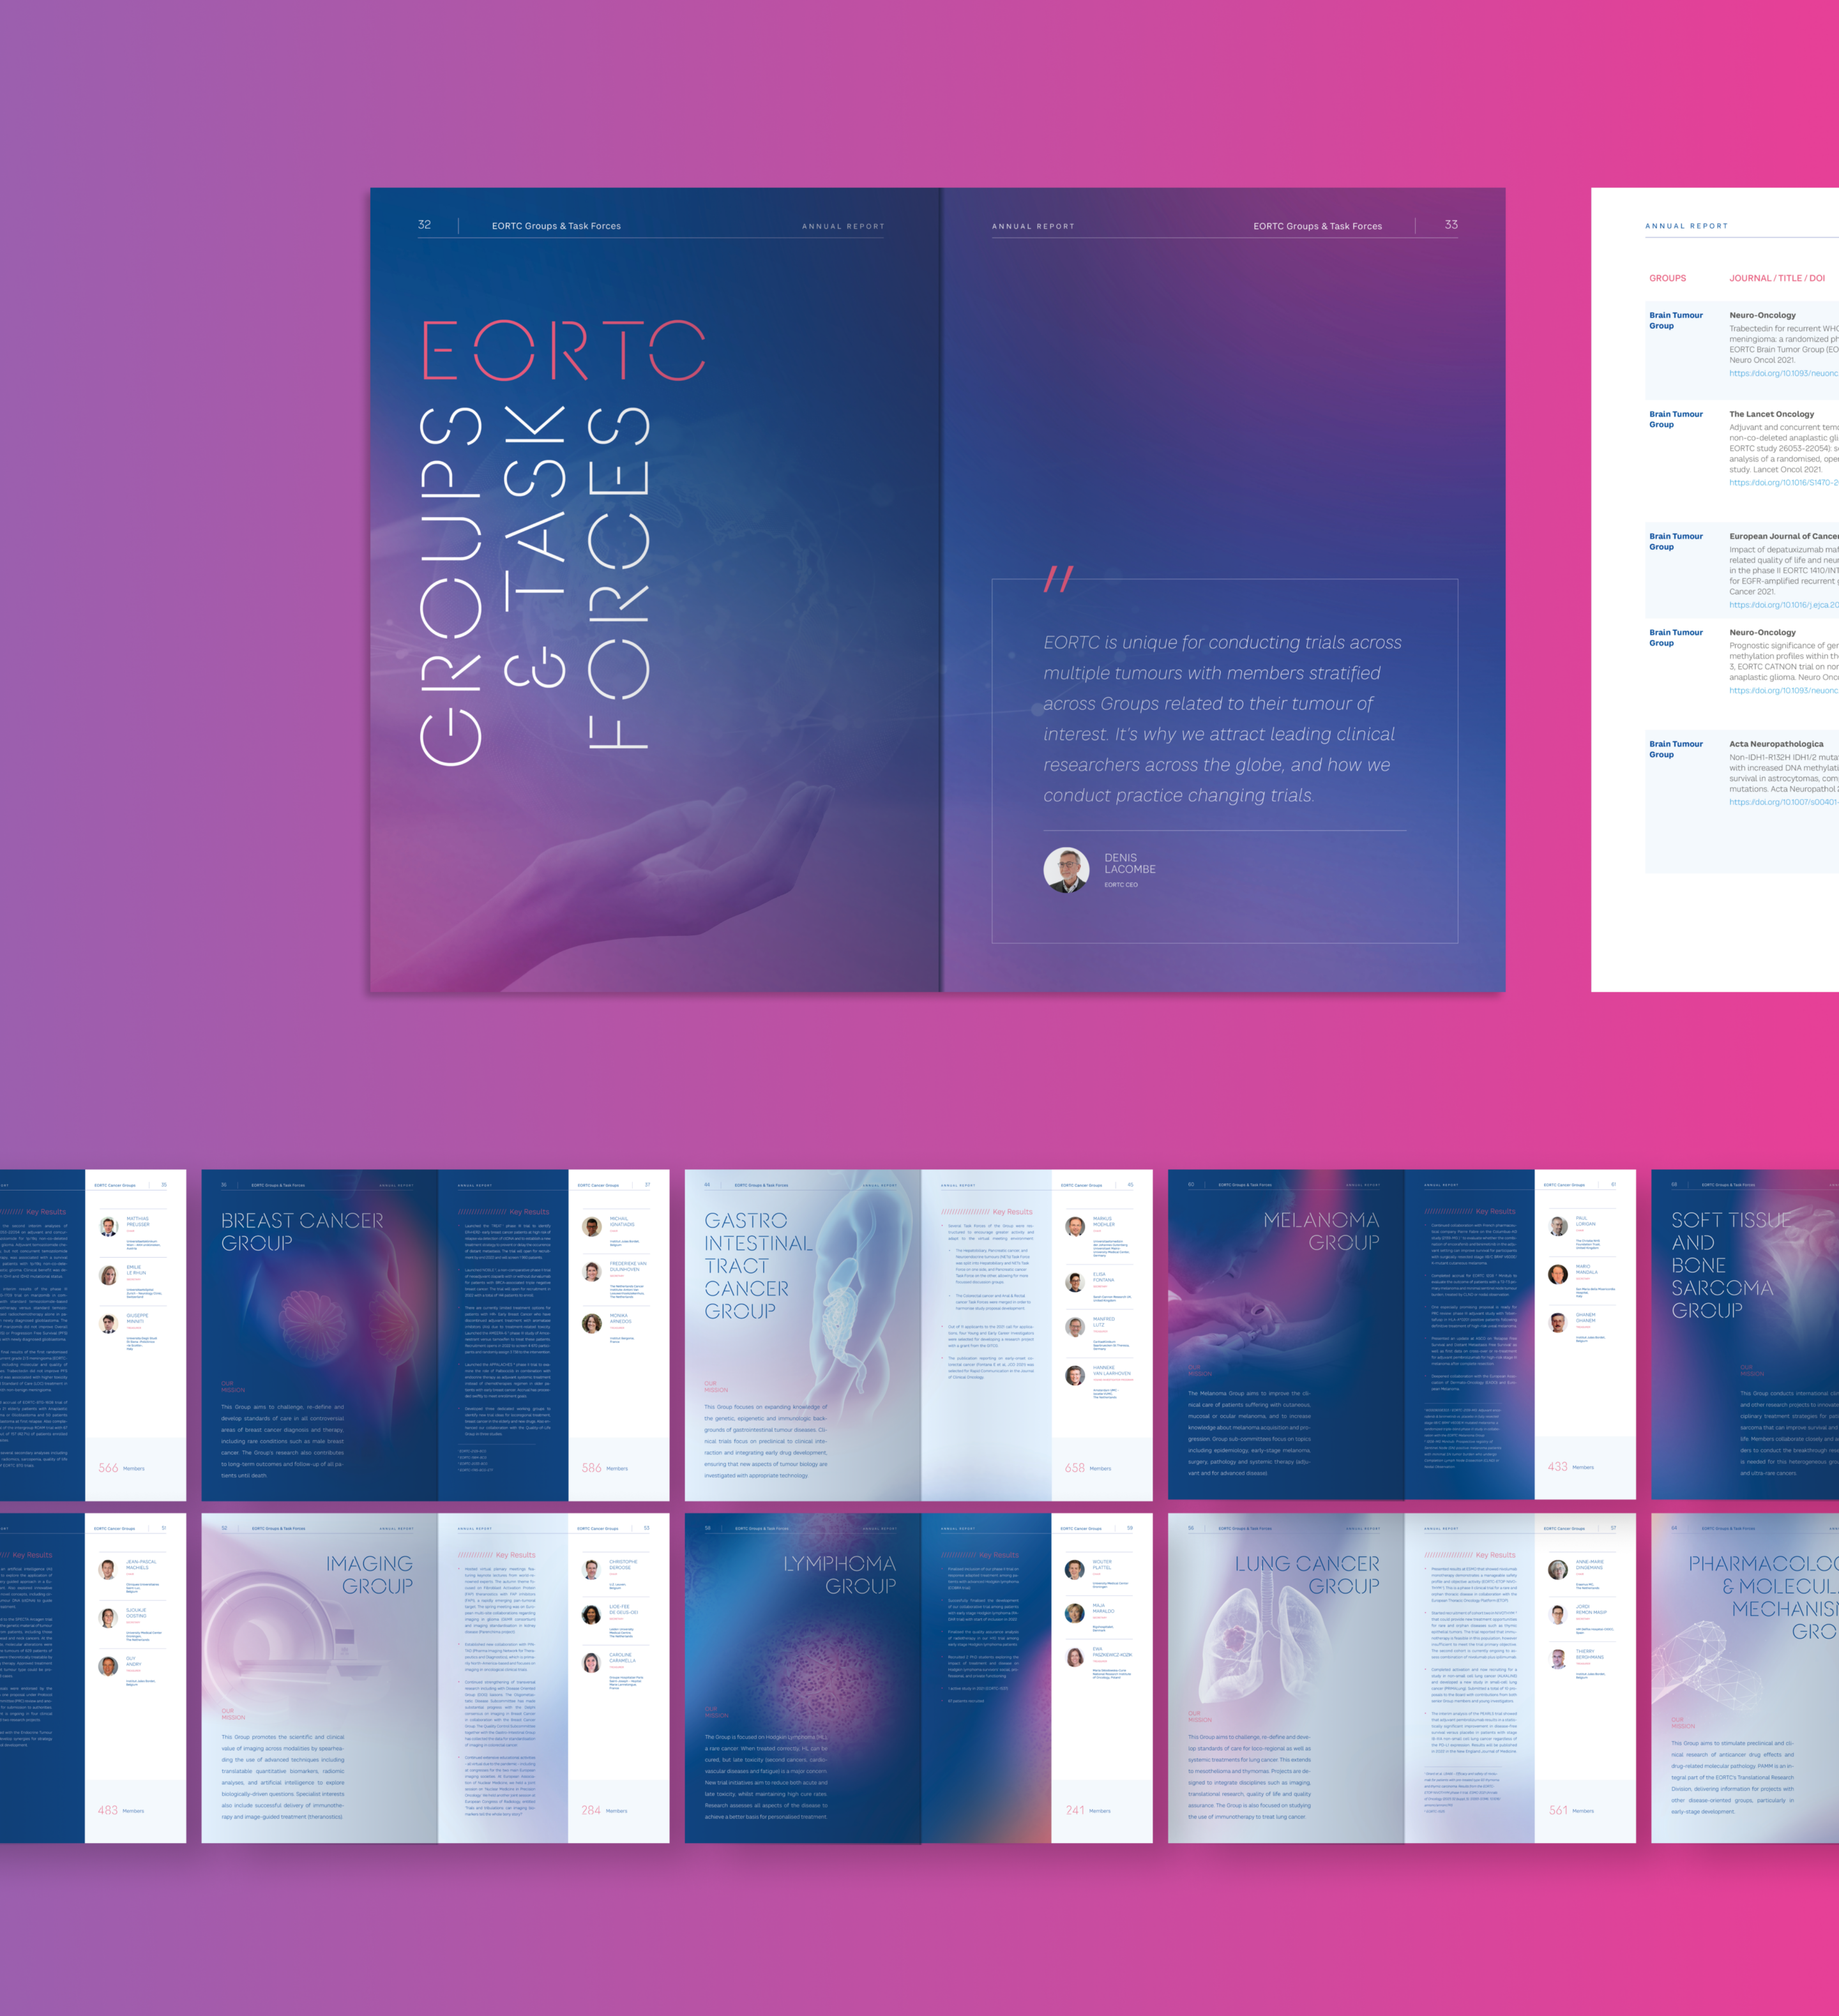 Some sample pages from the EORTC Annual Report by Atelier Design